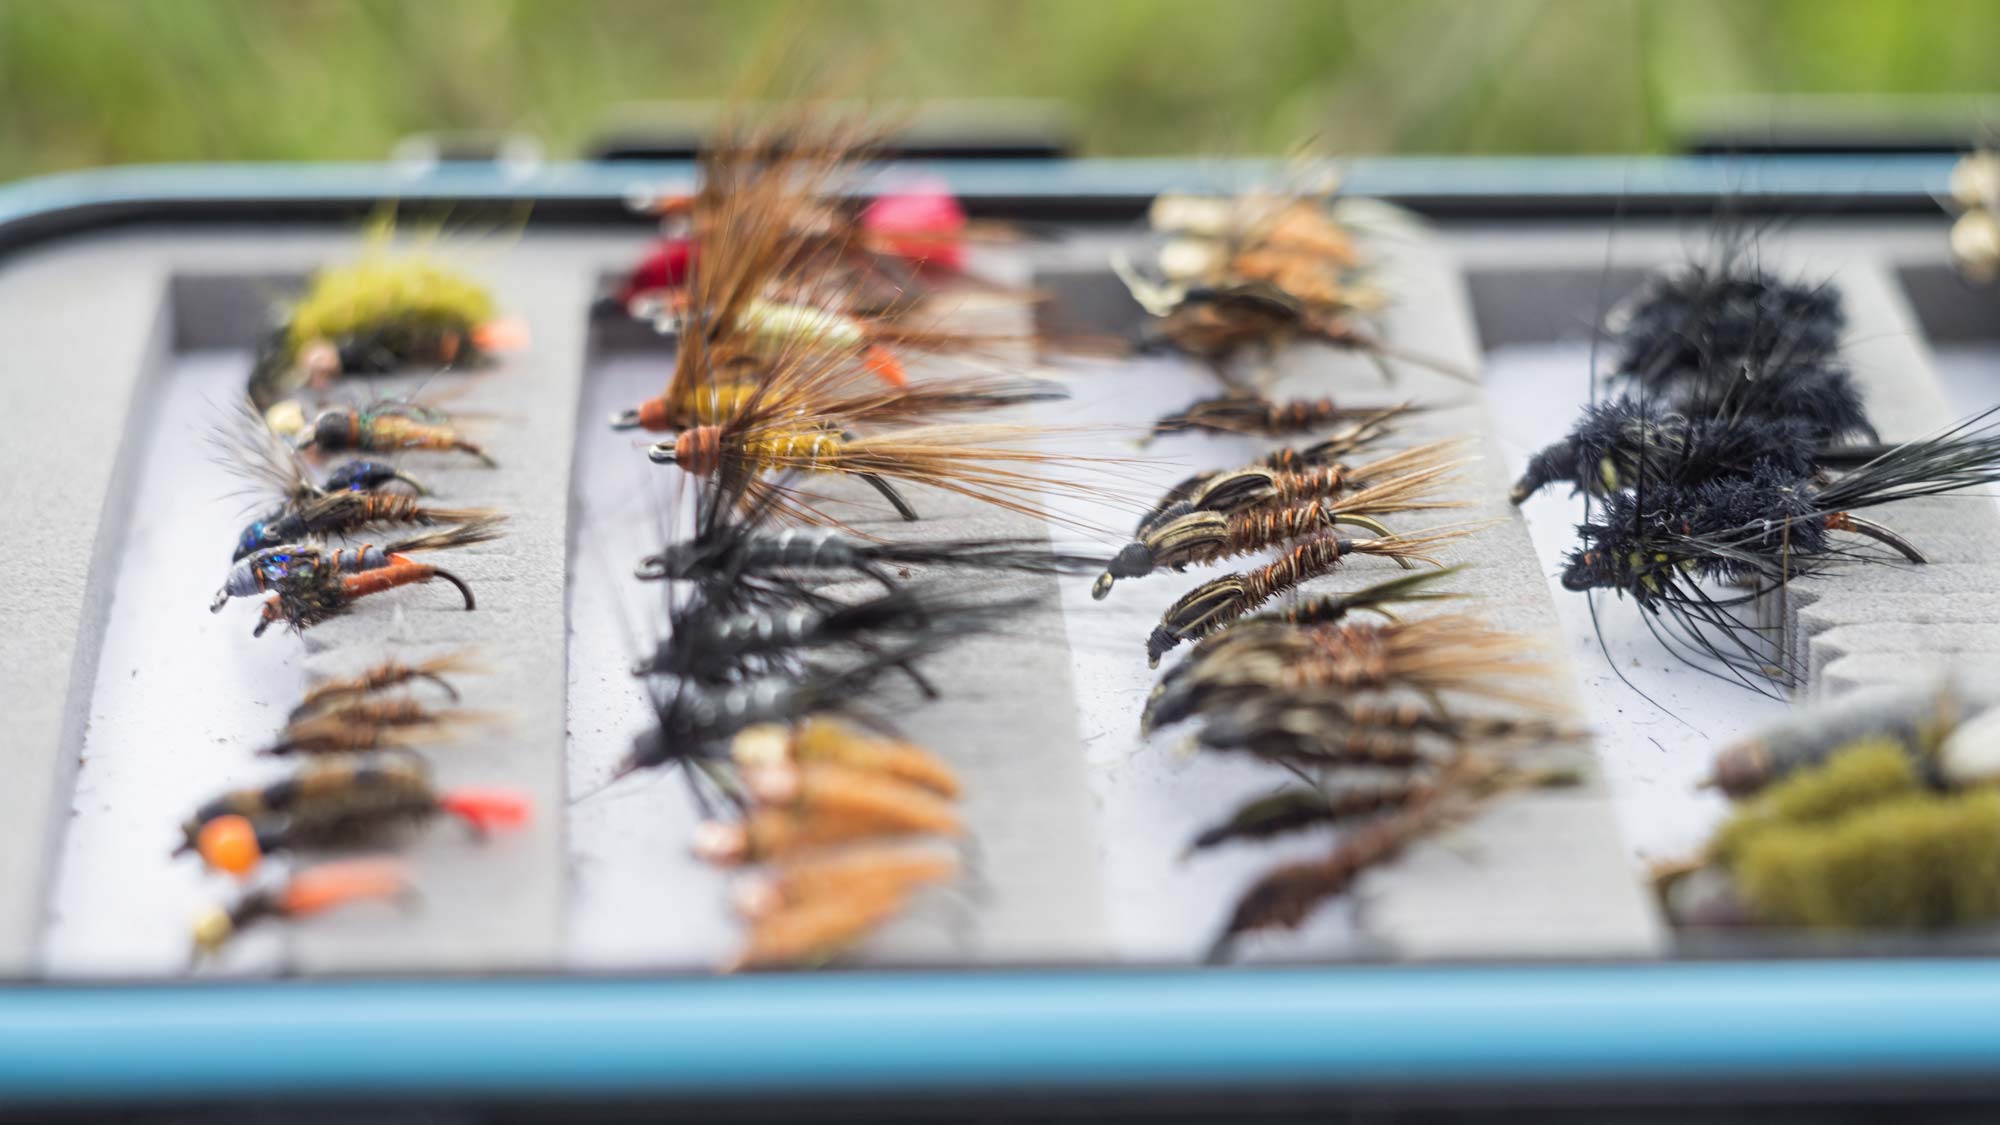 Fly flies in a box, used for fly fishing